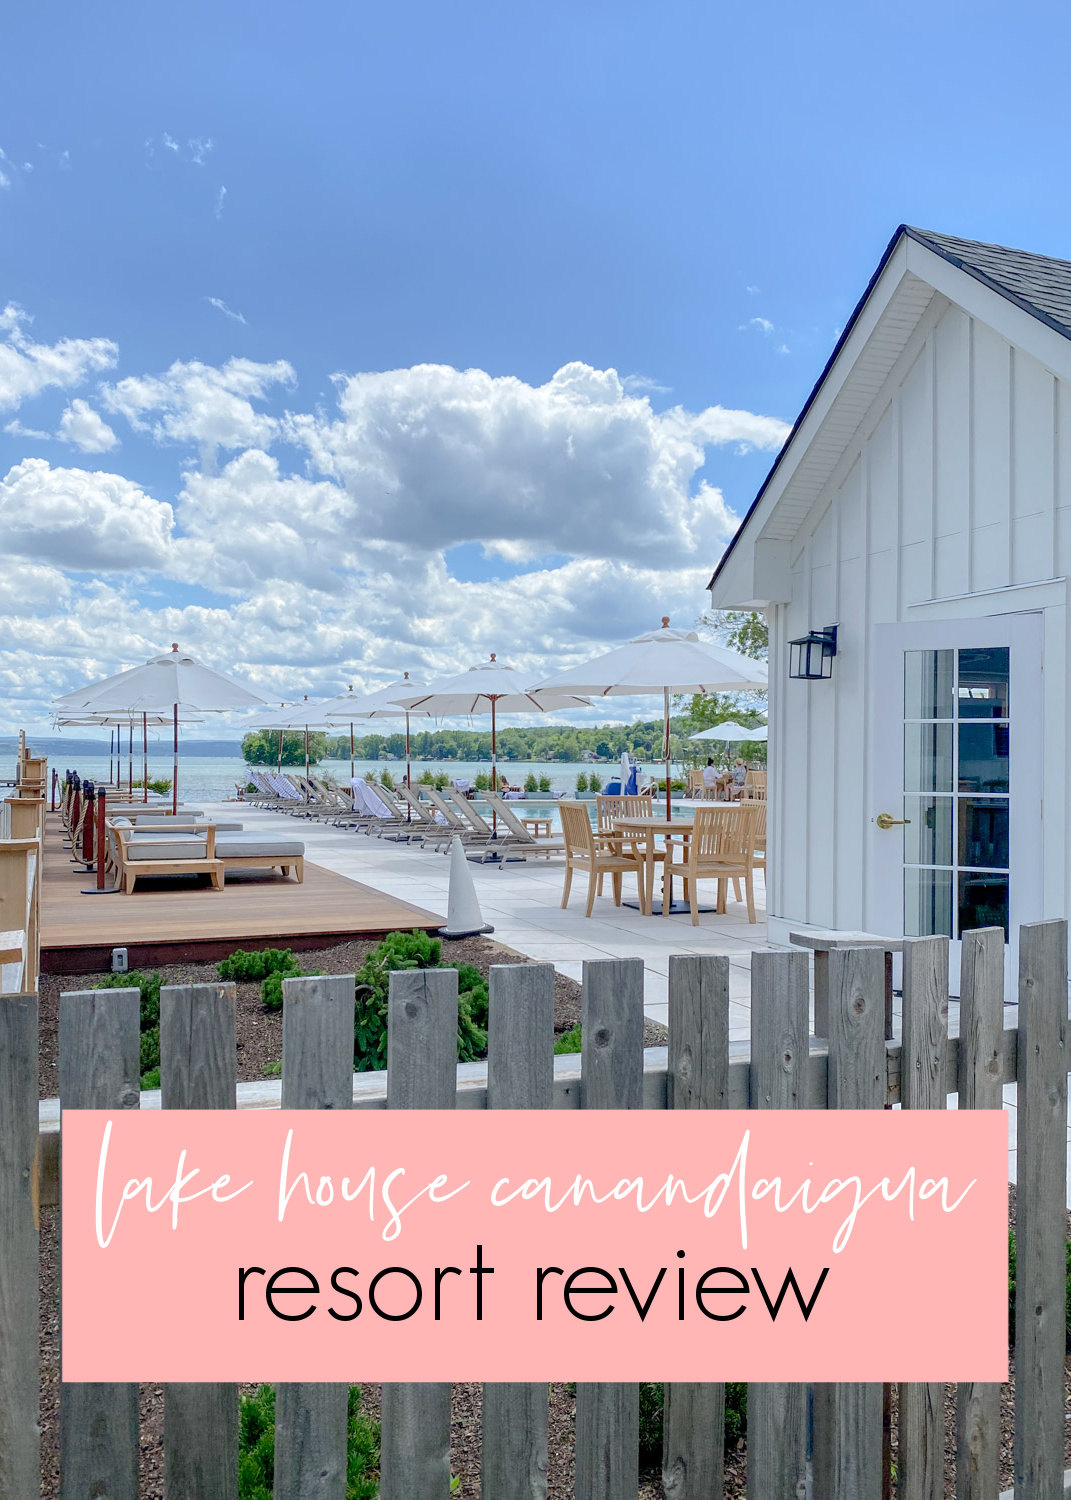 lake house canandaigua resort review, finger lakes region new york state